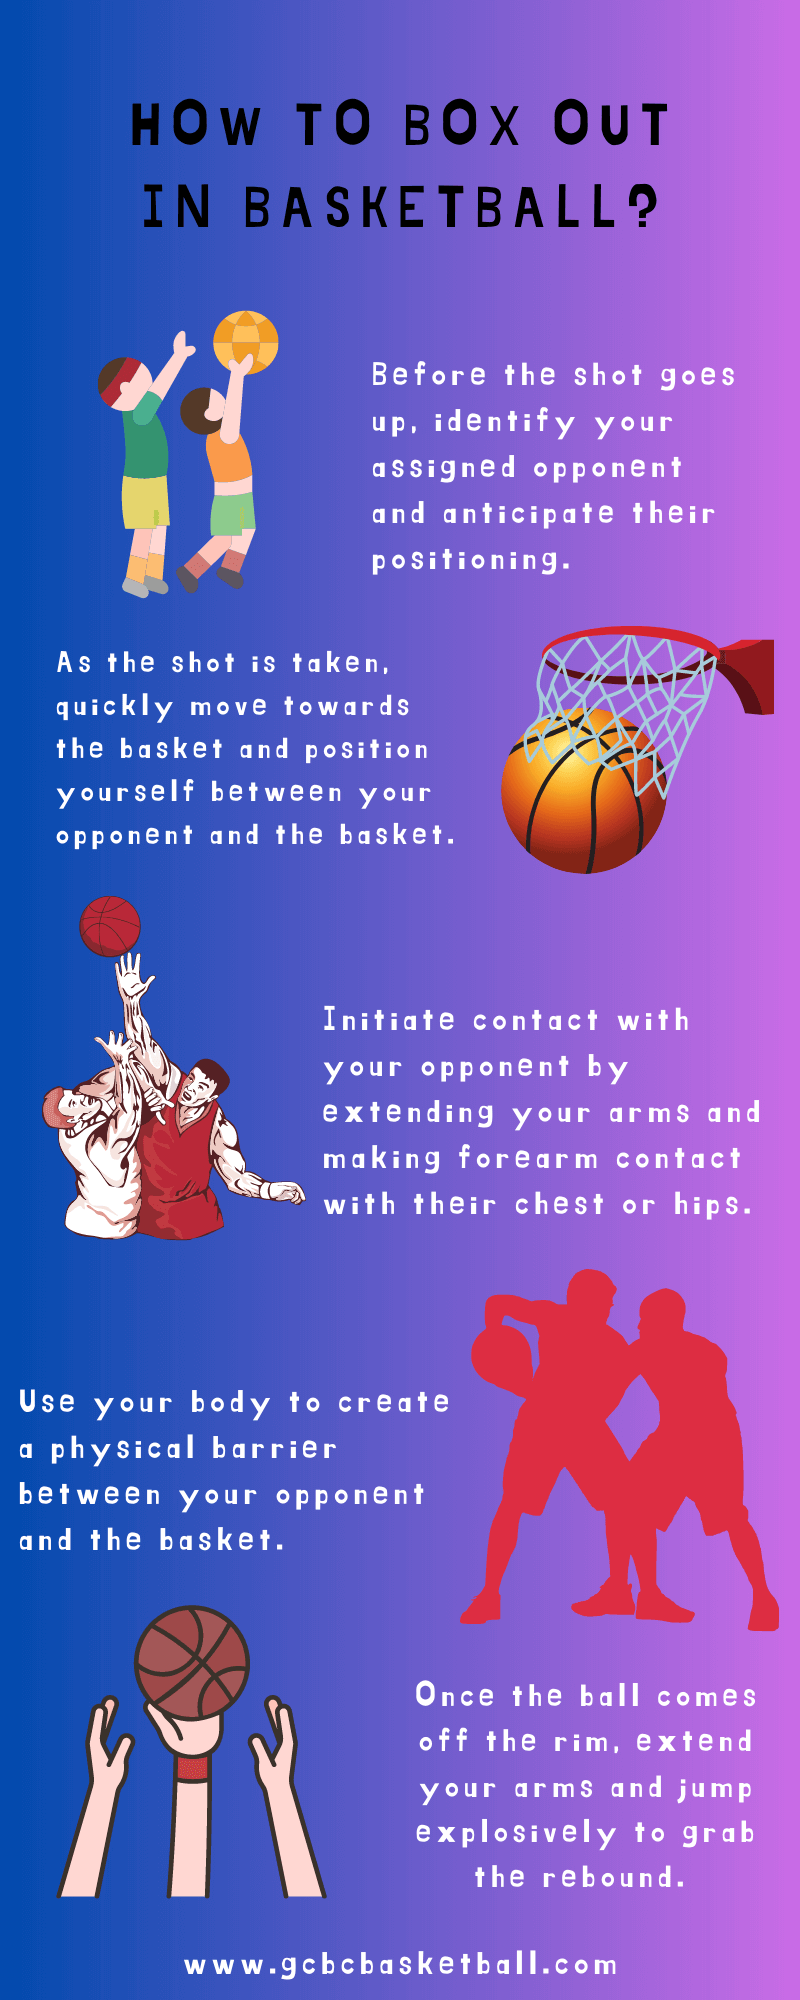 What Is Box Out In Basketball?